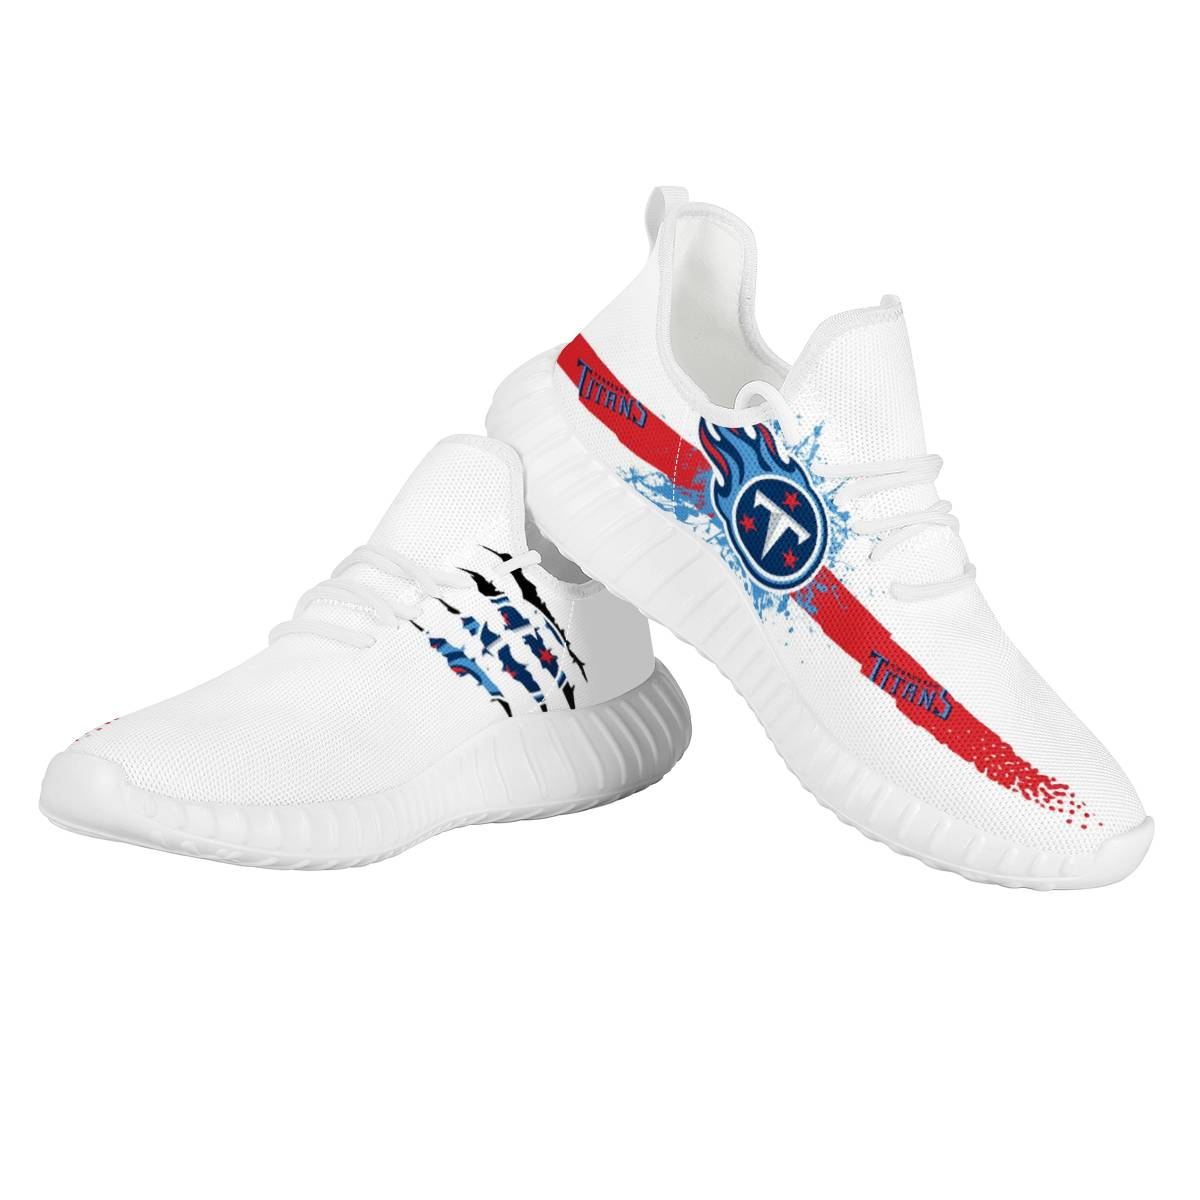 Women's Tennessee Titans Mesh Knit Sneakers/Shoes 005